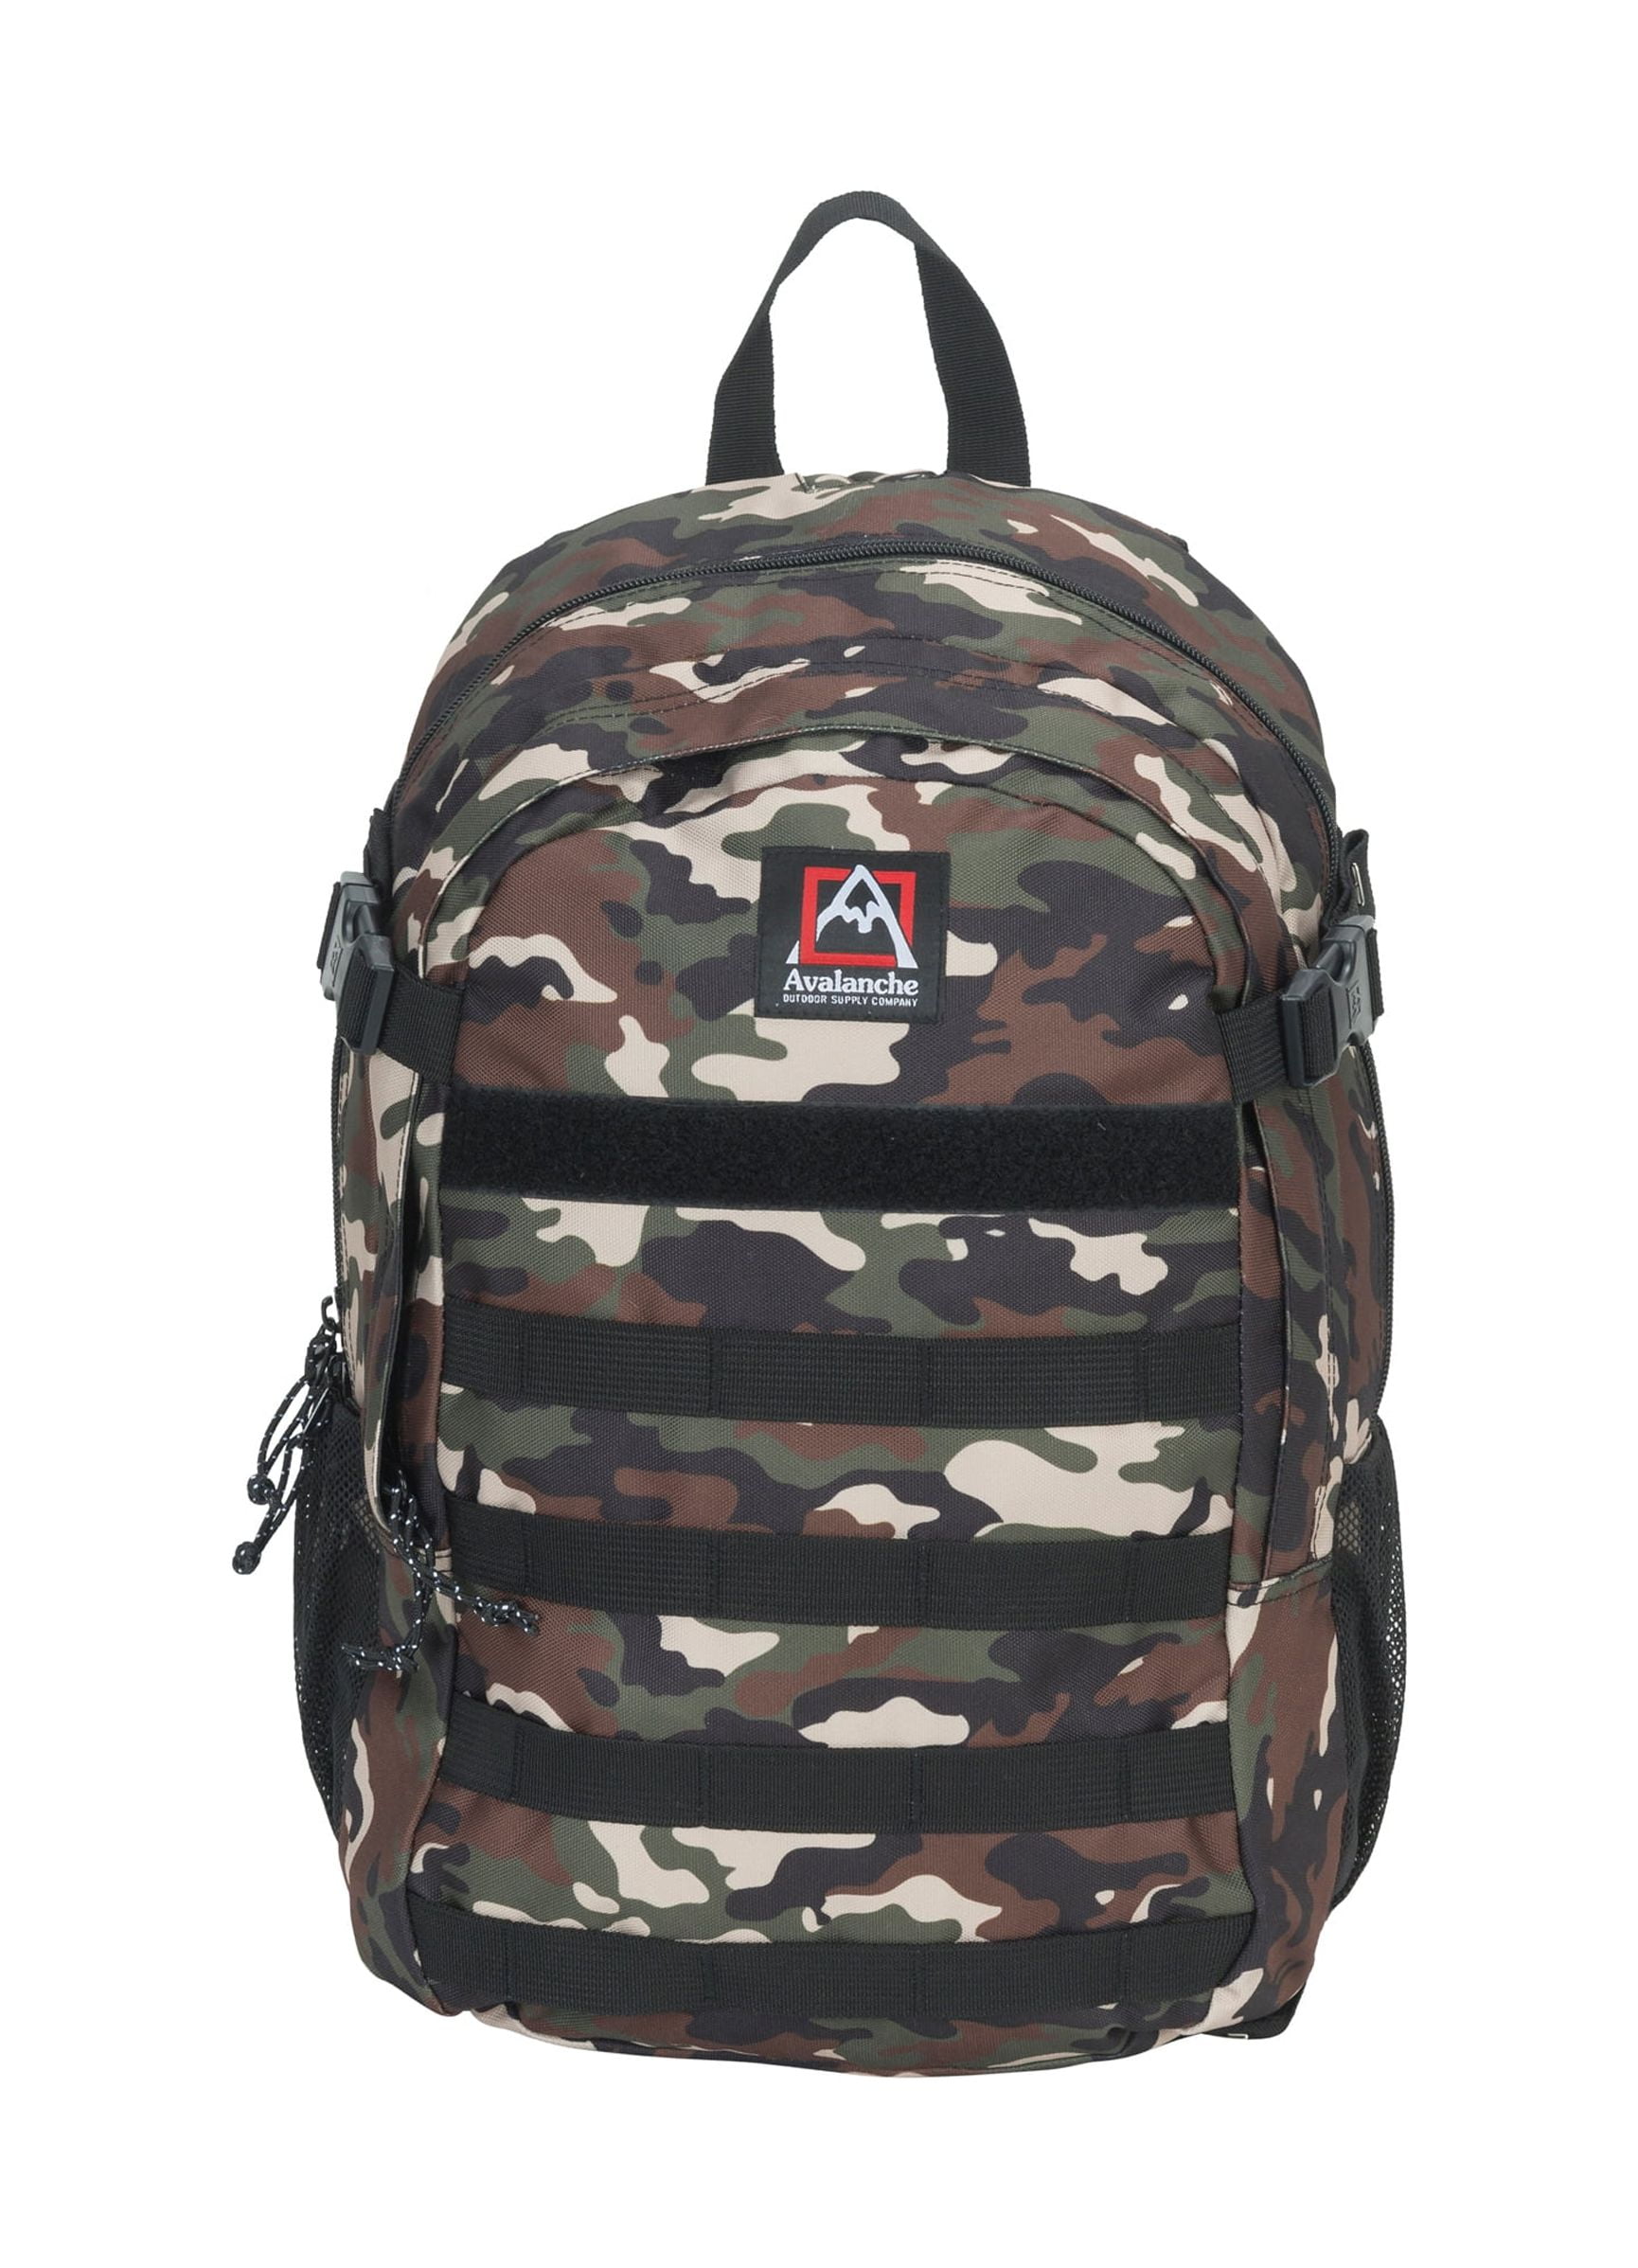 Avalanche Outdoor Supply